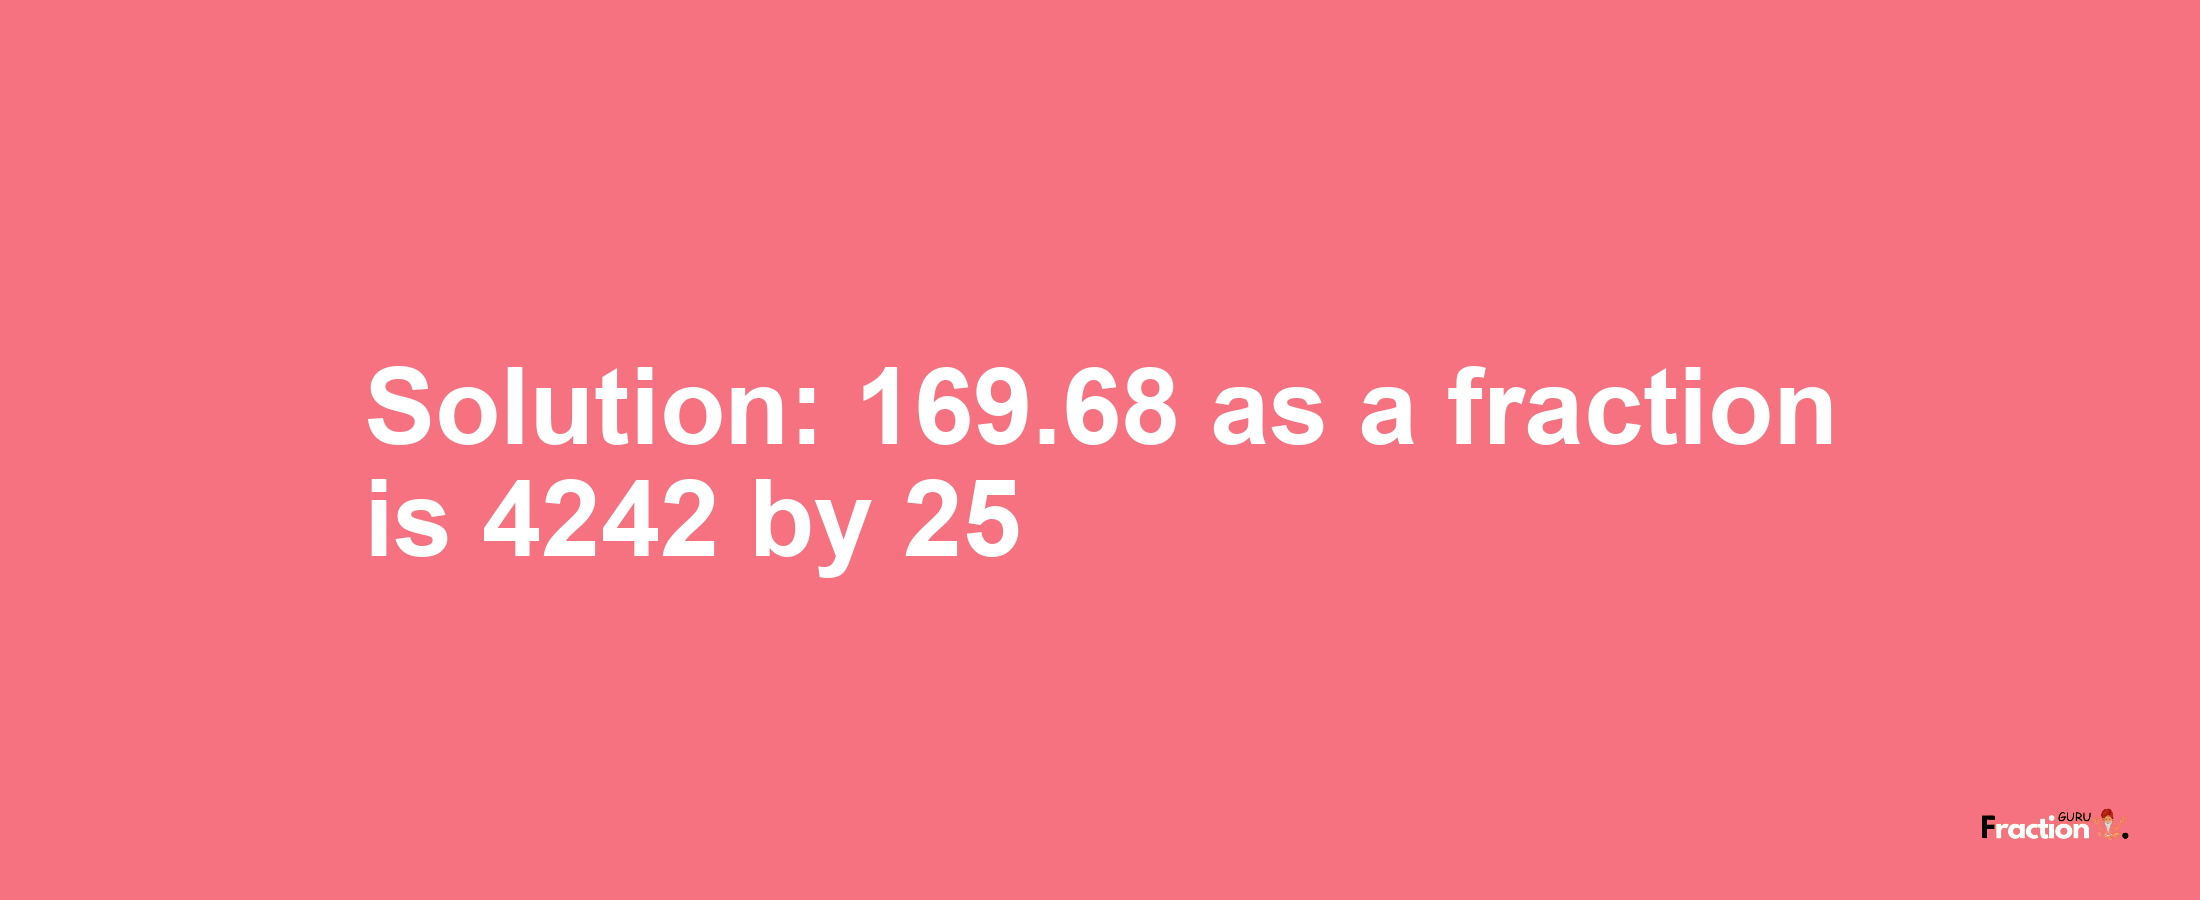 Solution:169.68 as a fraction is 4242/25